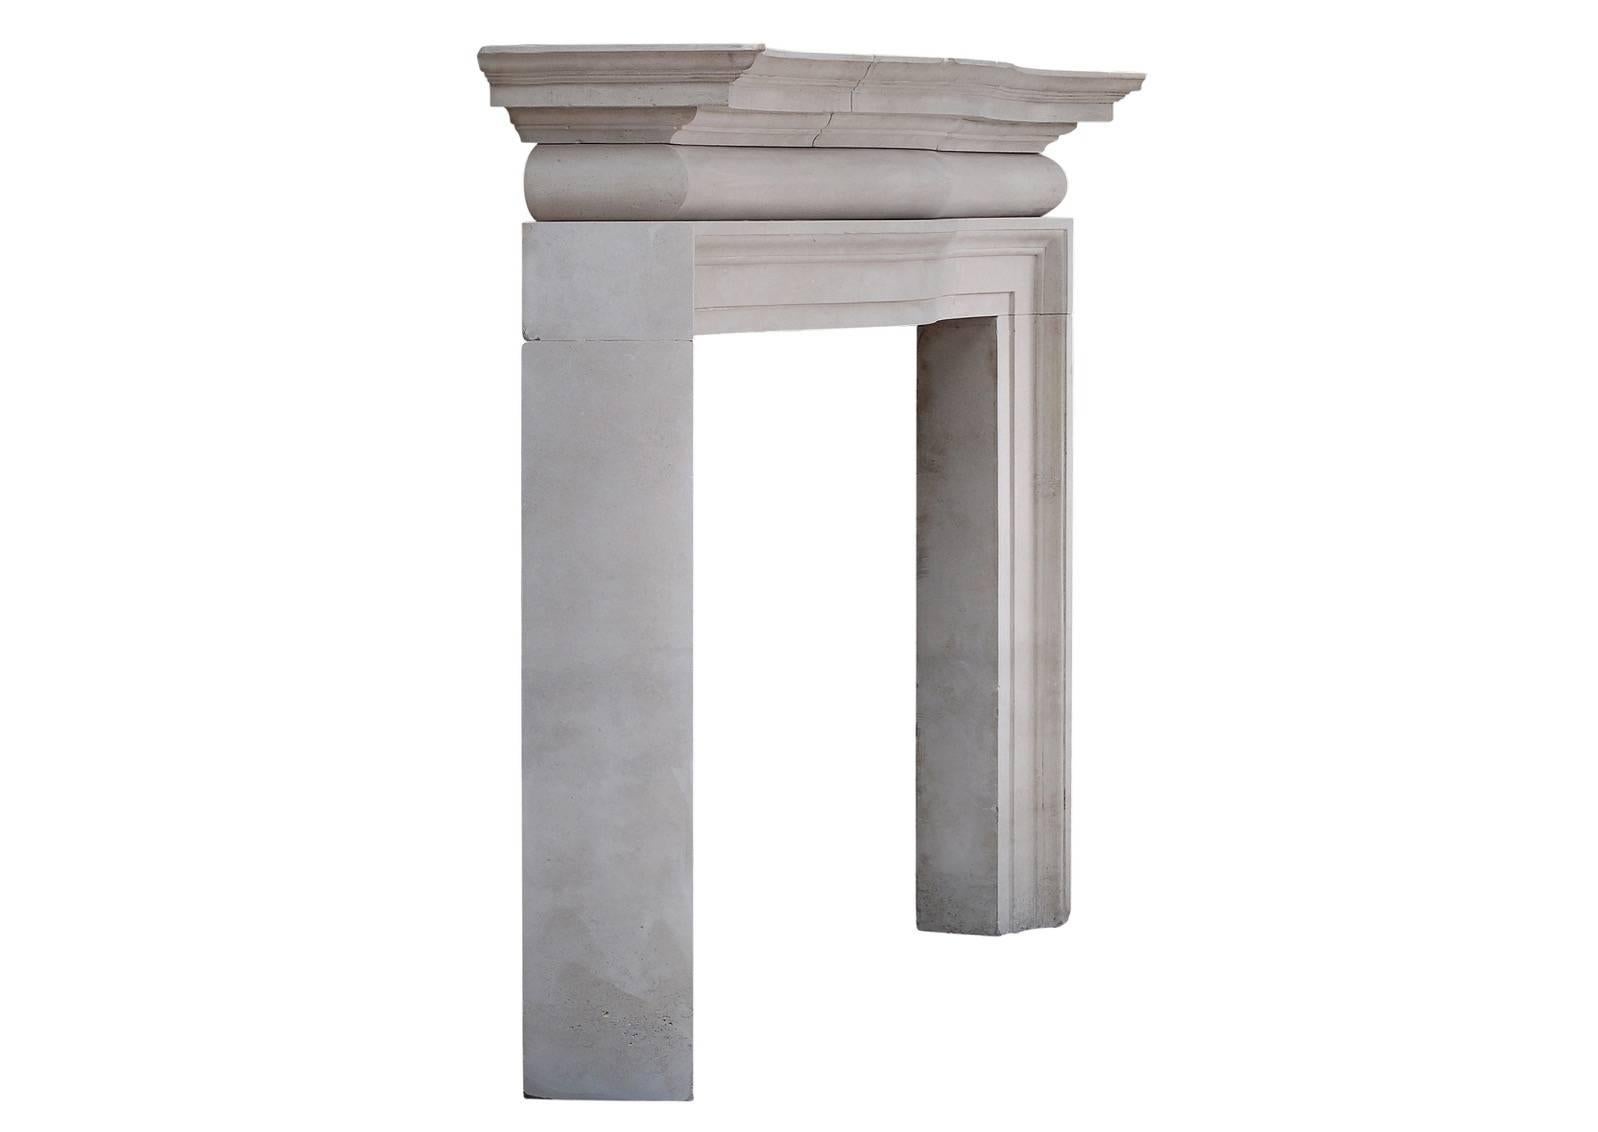 A large and imposing English Portland stone fireplace. The shaped barrel frieze surmounted by shaped, moulded shelf above. The heavy jambs with angled out grounds, circa 1900, quite possibly by Edwin Lutyens. A very impressive piece, which would